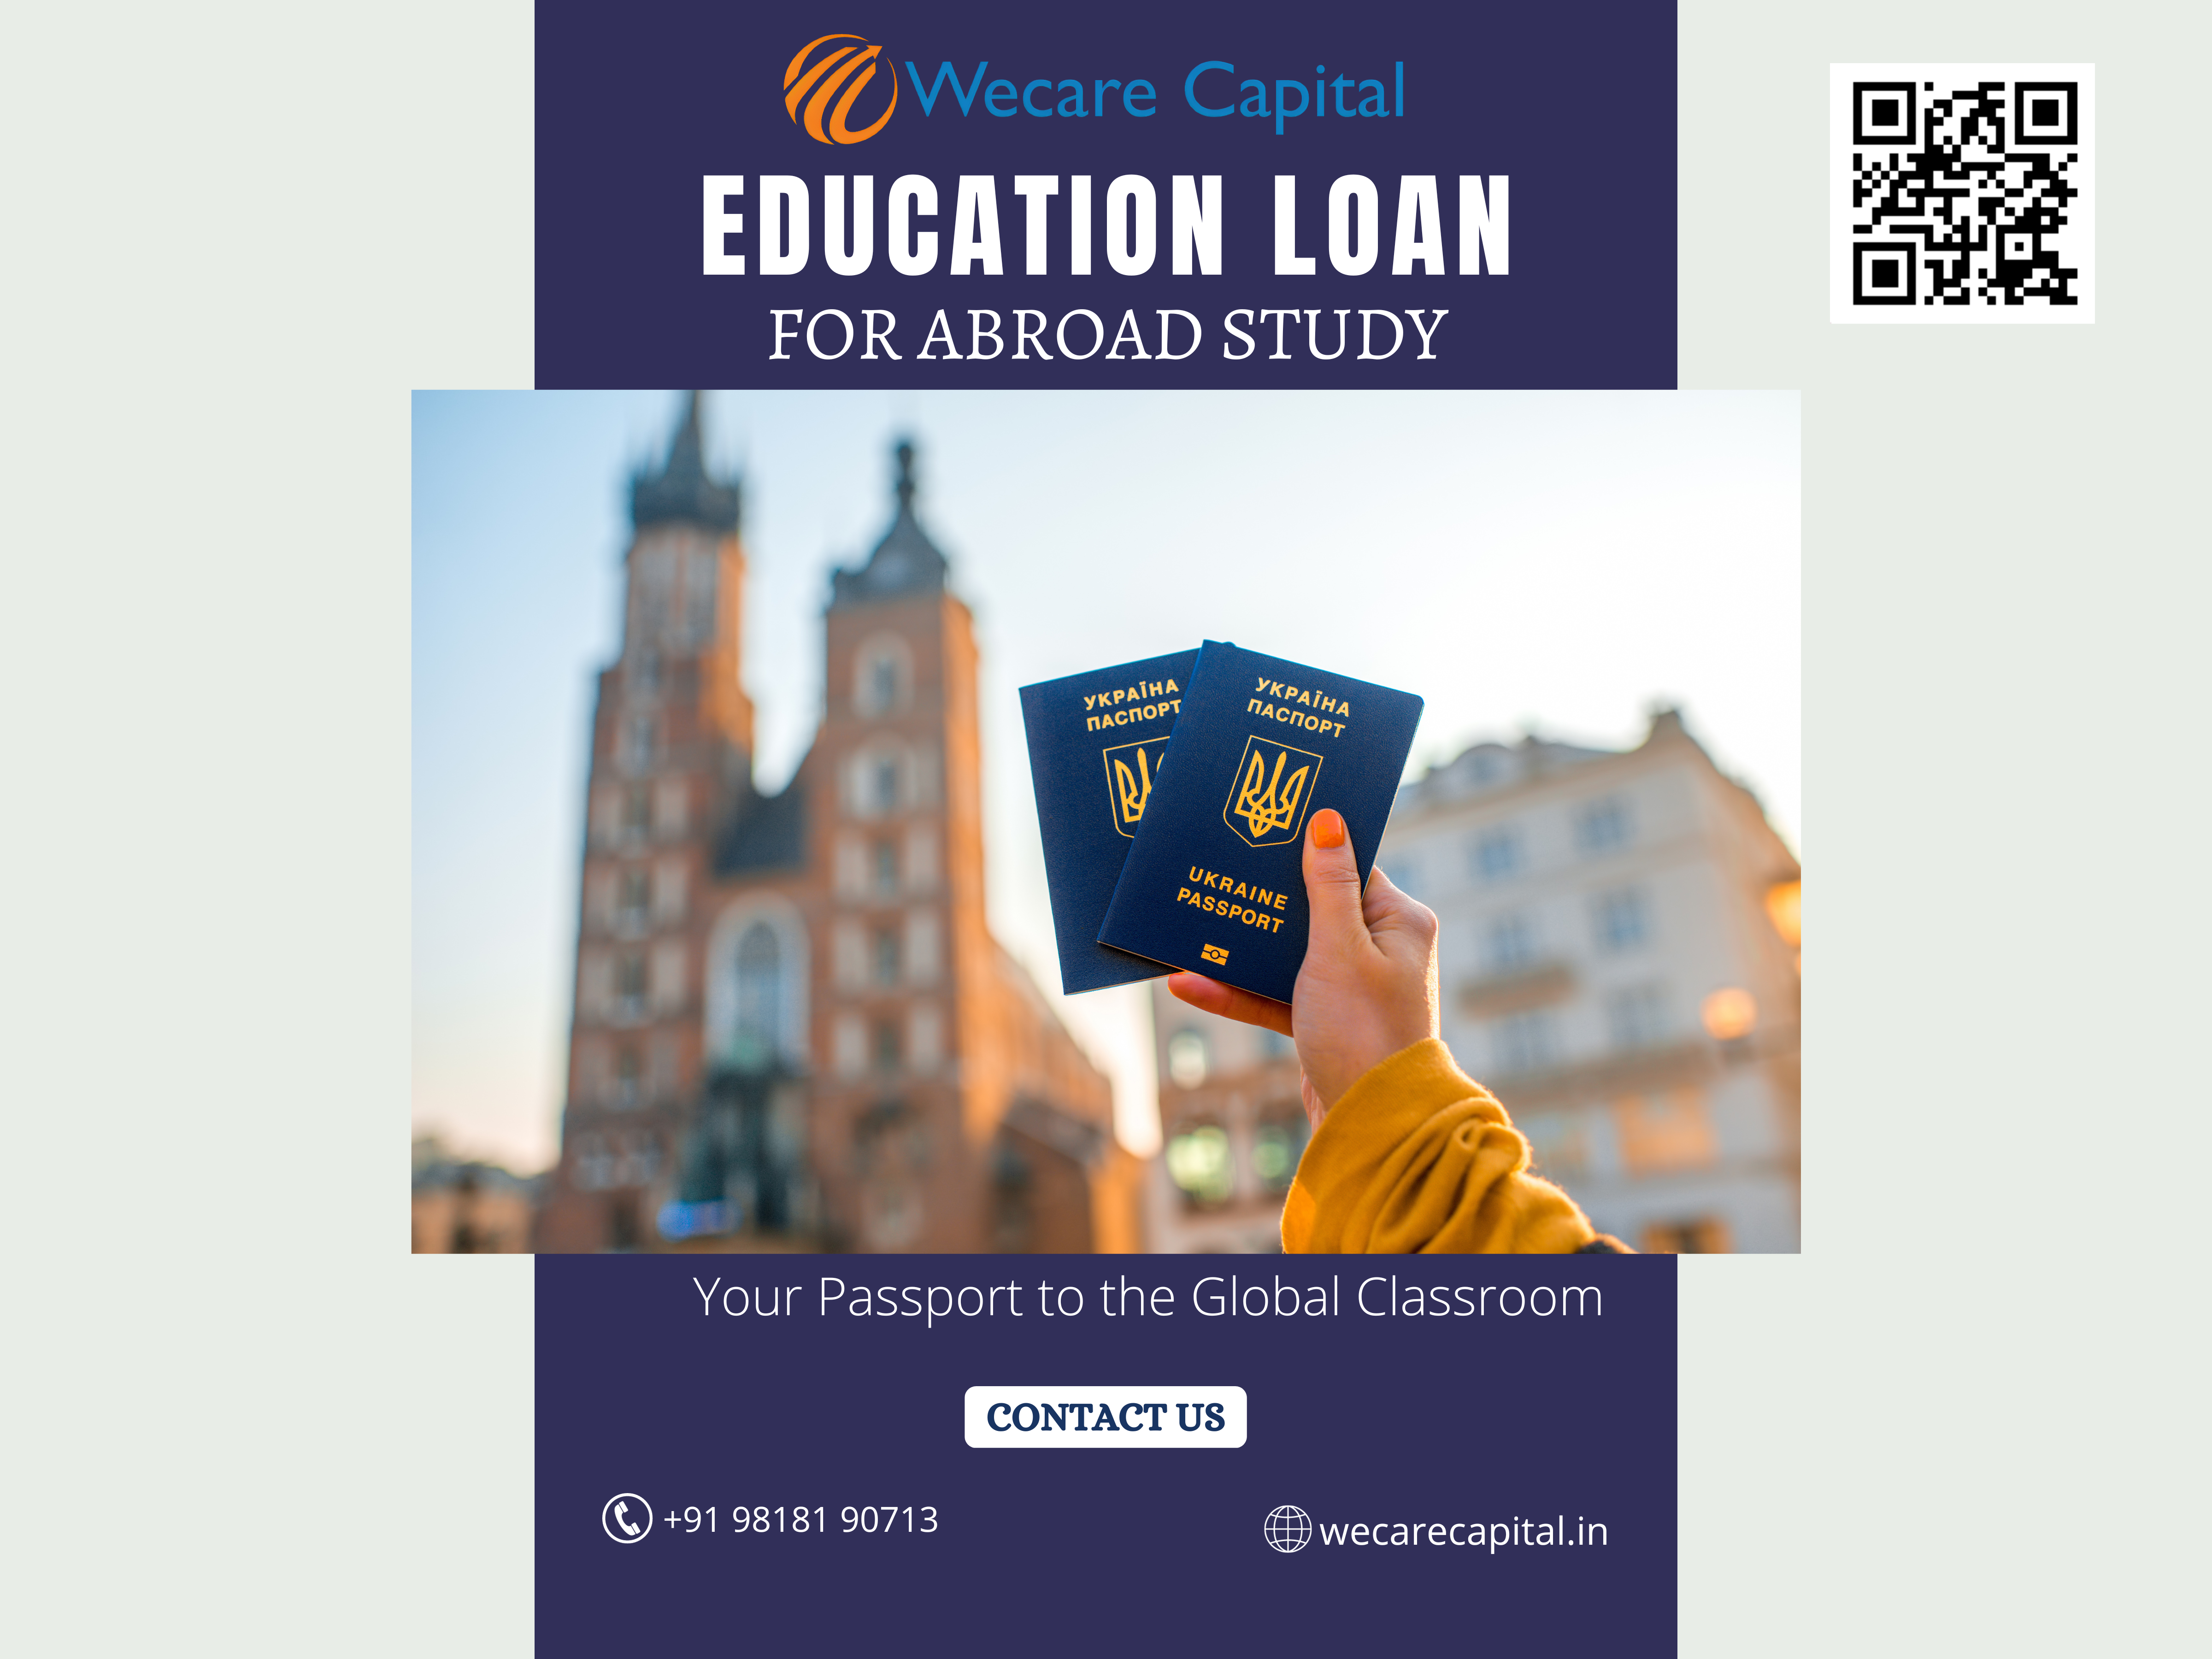 Education Loan: Your Passport to the Global Classroom